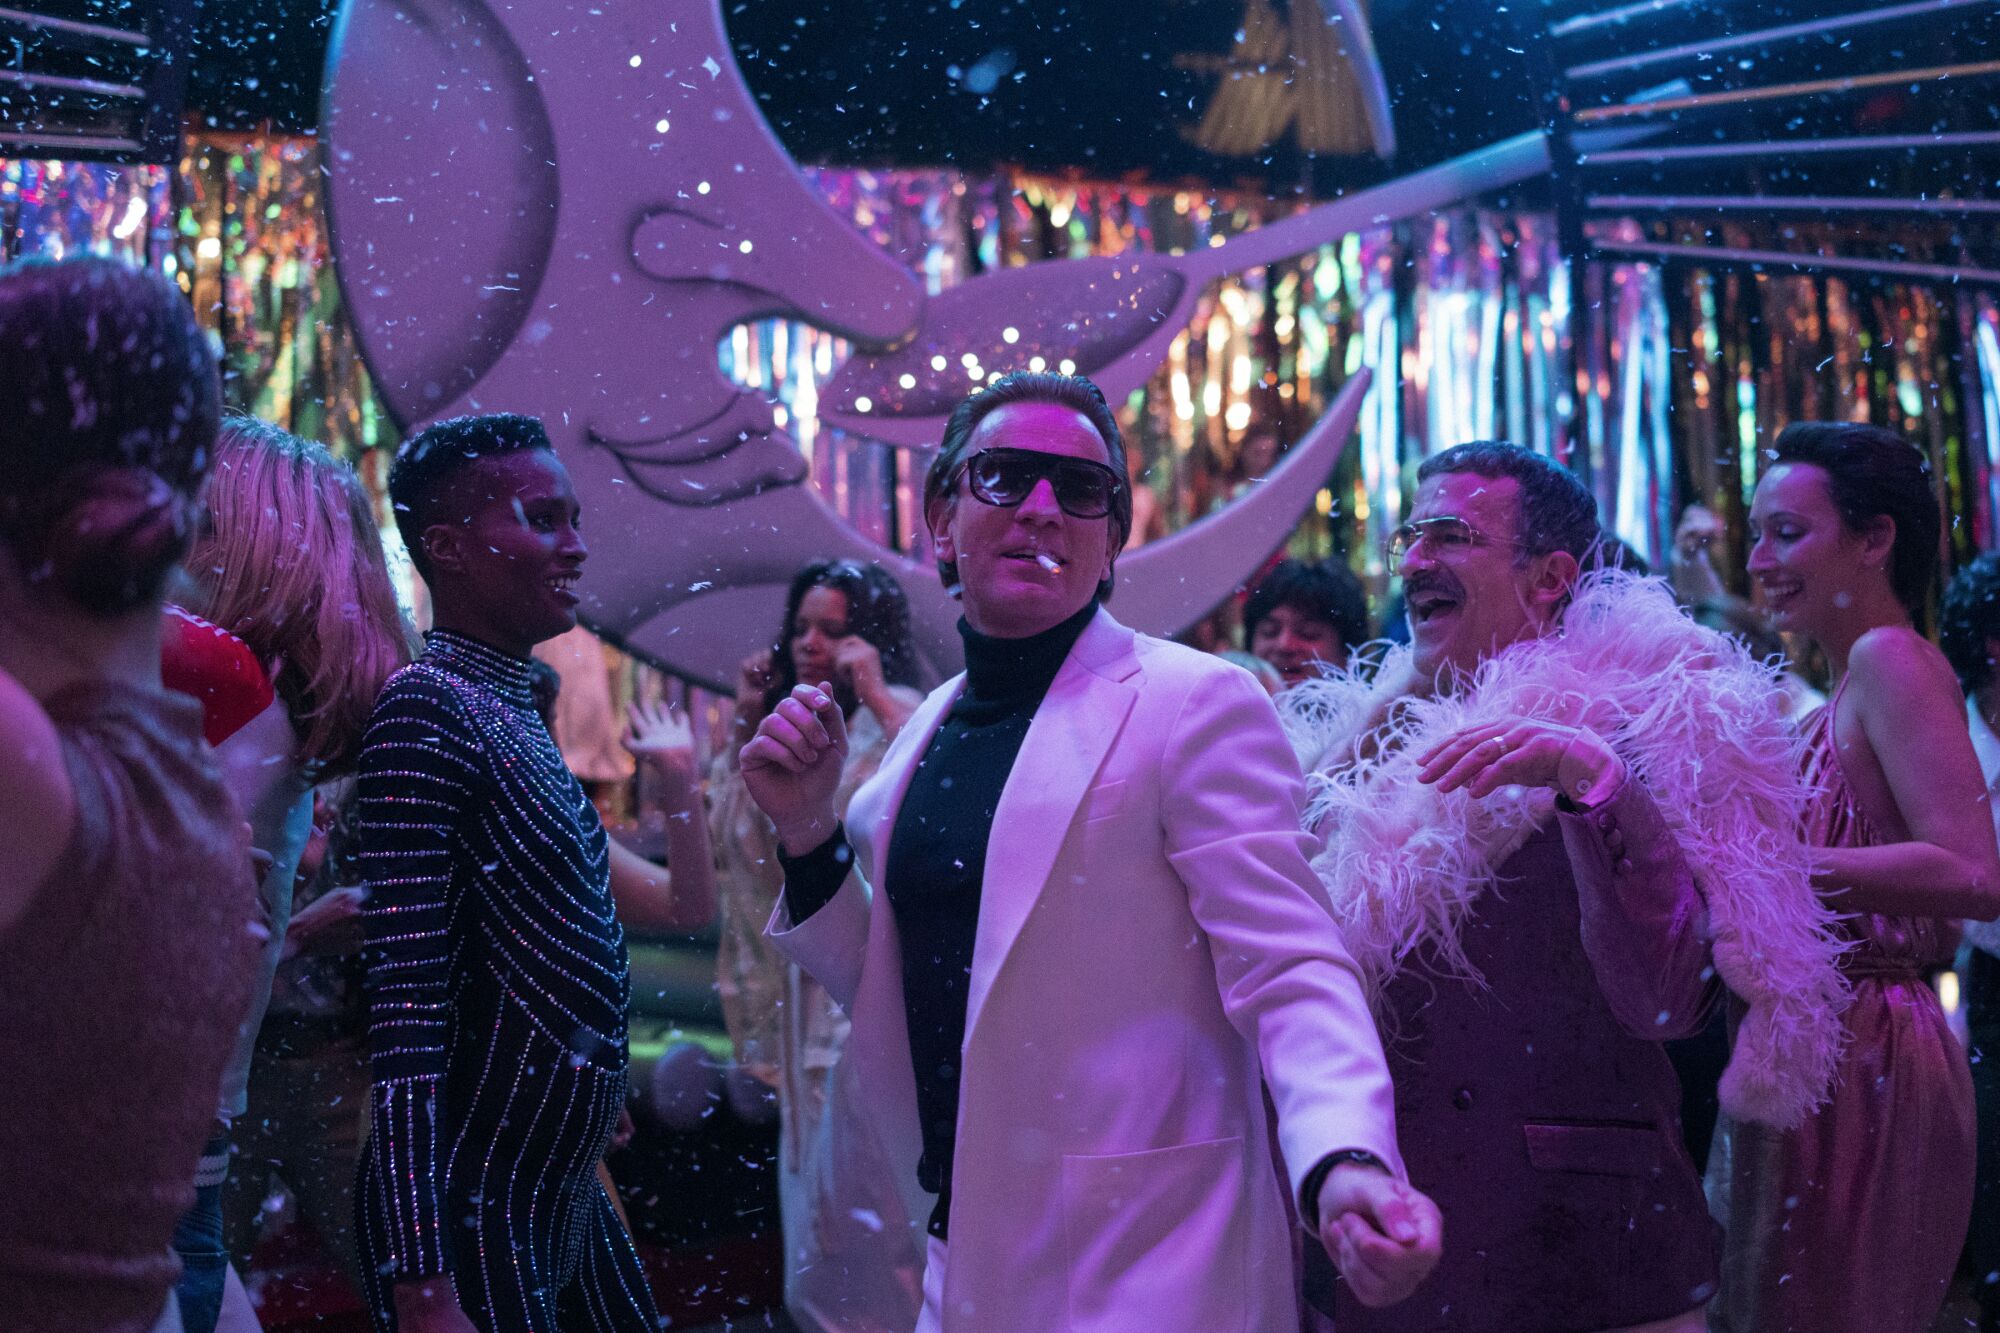 Several well-dressed people, with Ewan McGregor as Halston in the center, dancing inside Studio 54 in "Halston."